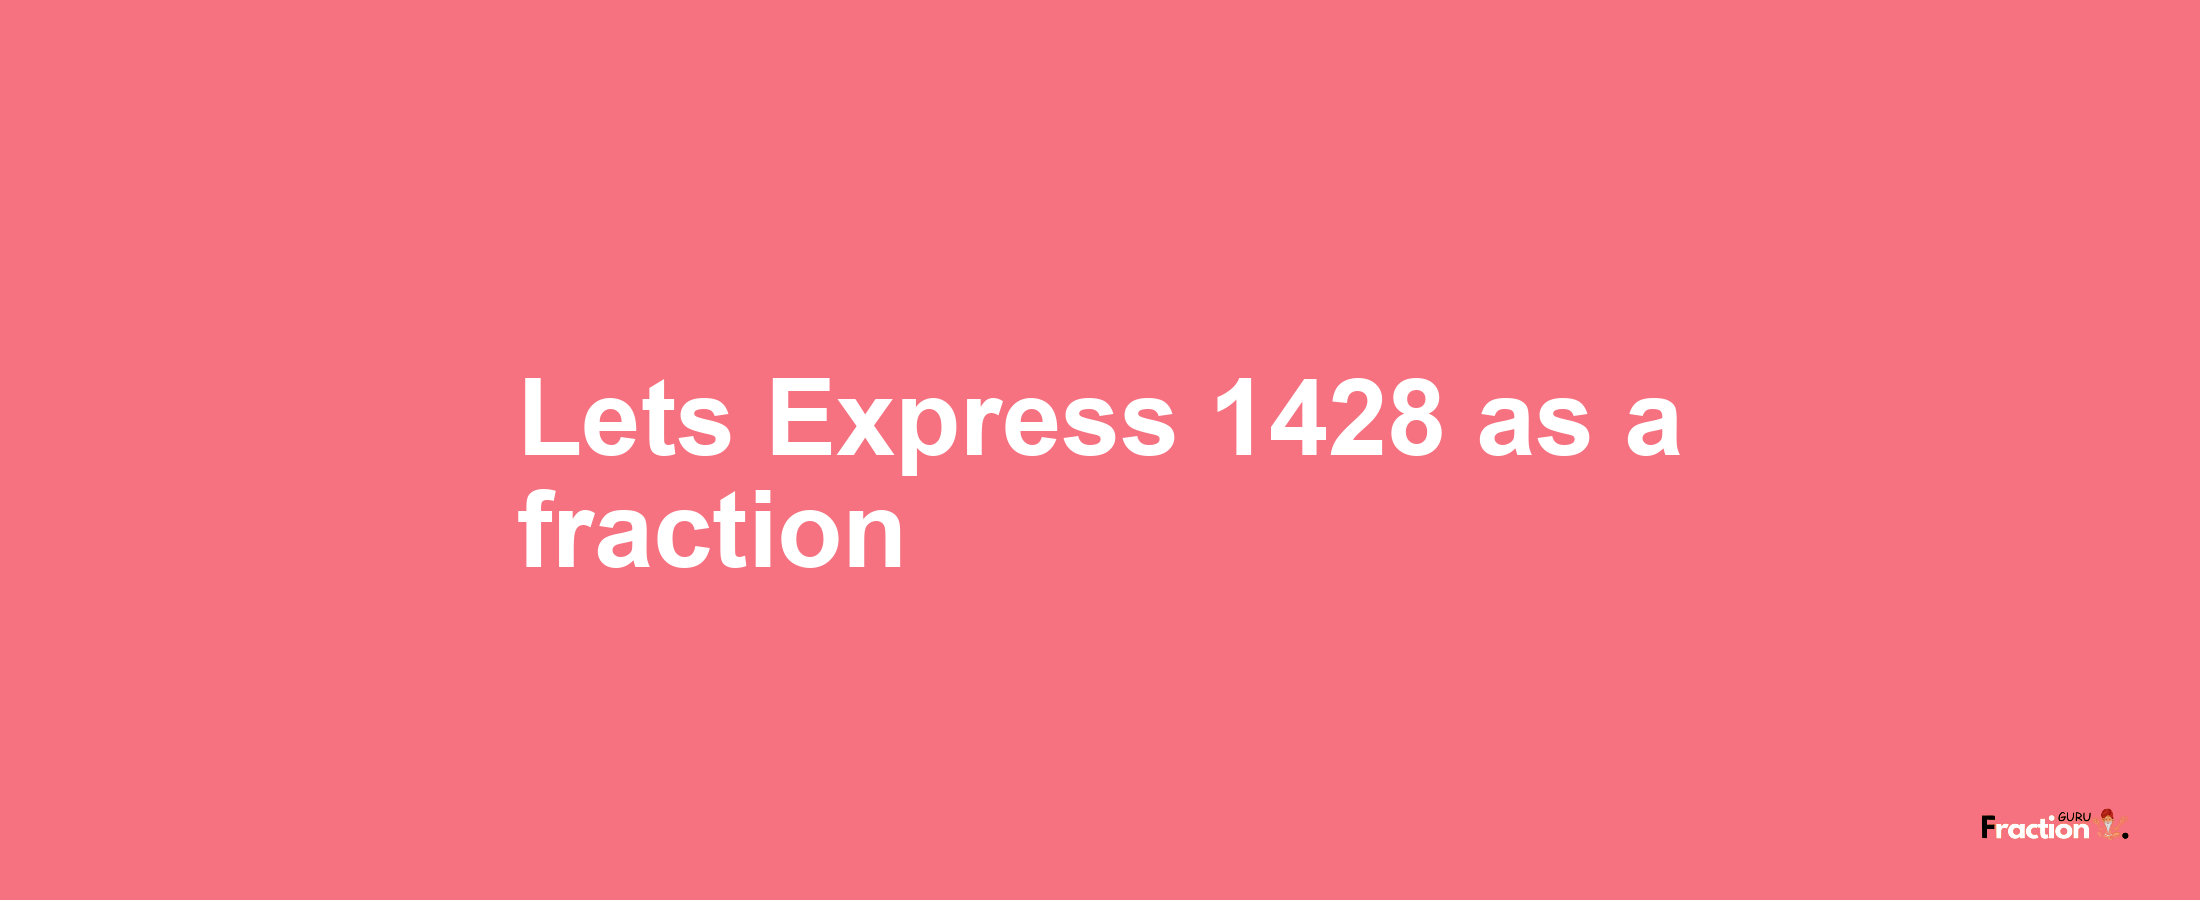 Lets Express 1428 as afraction